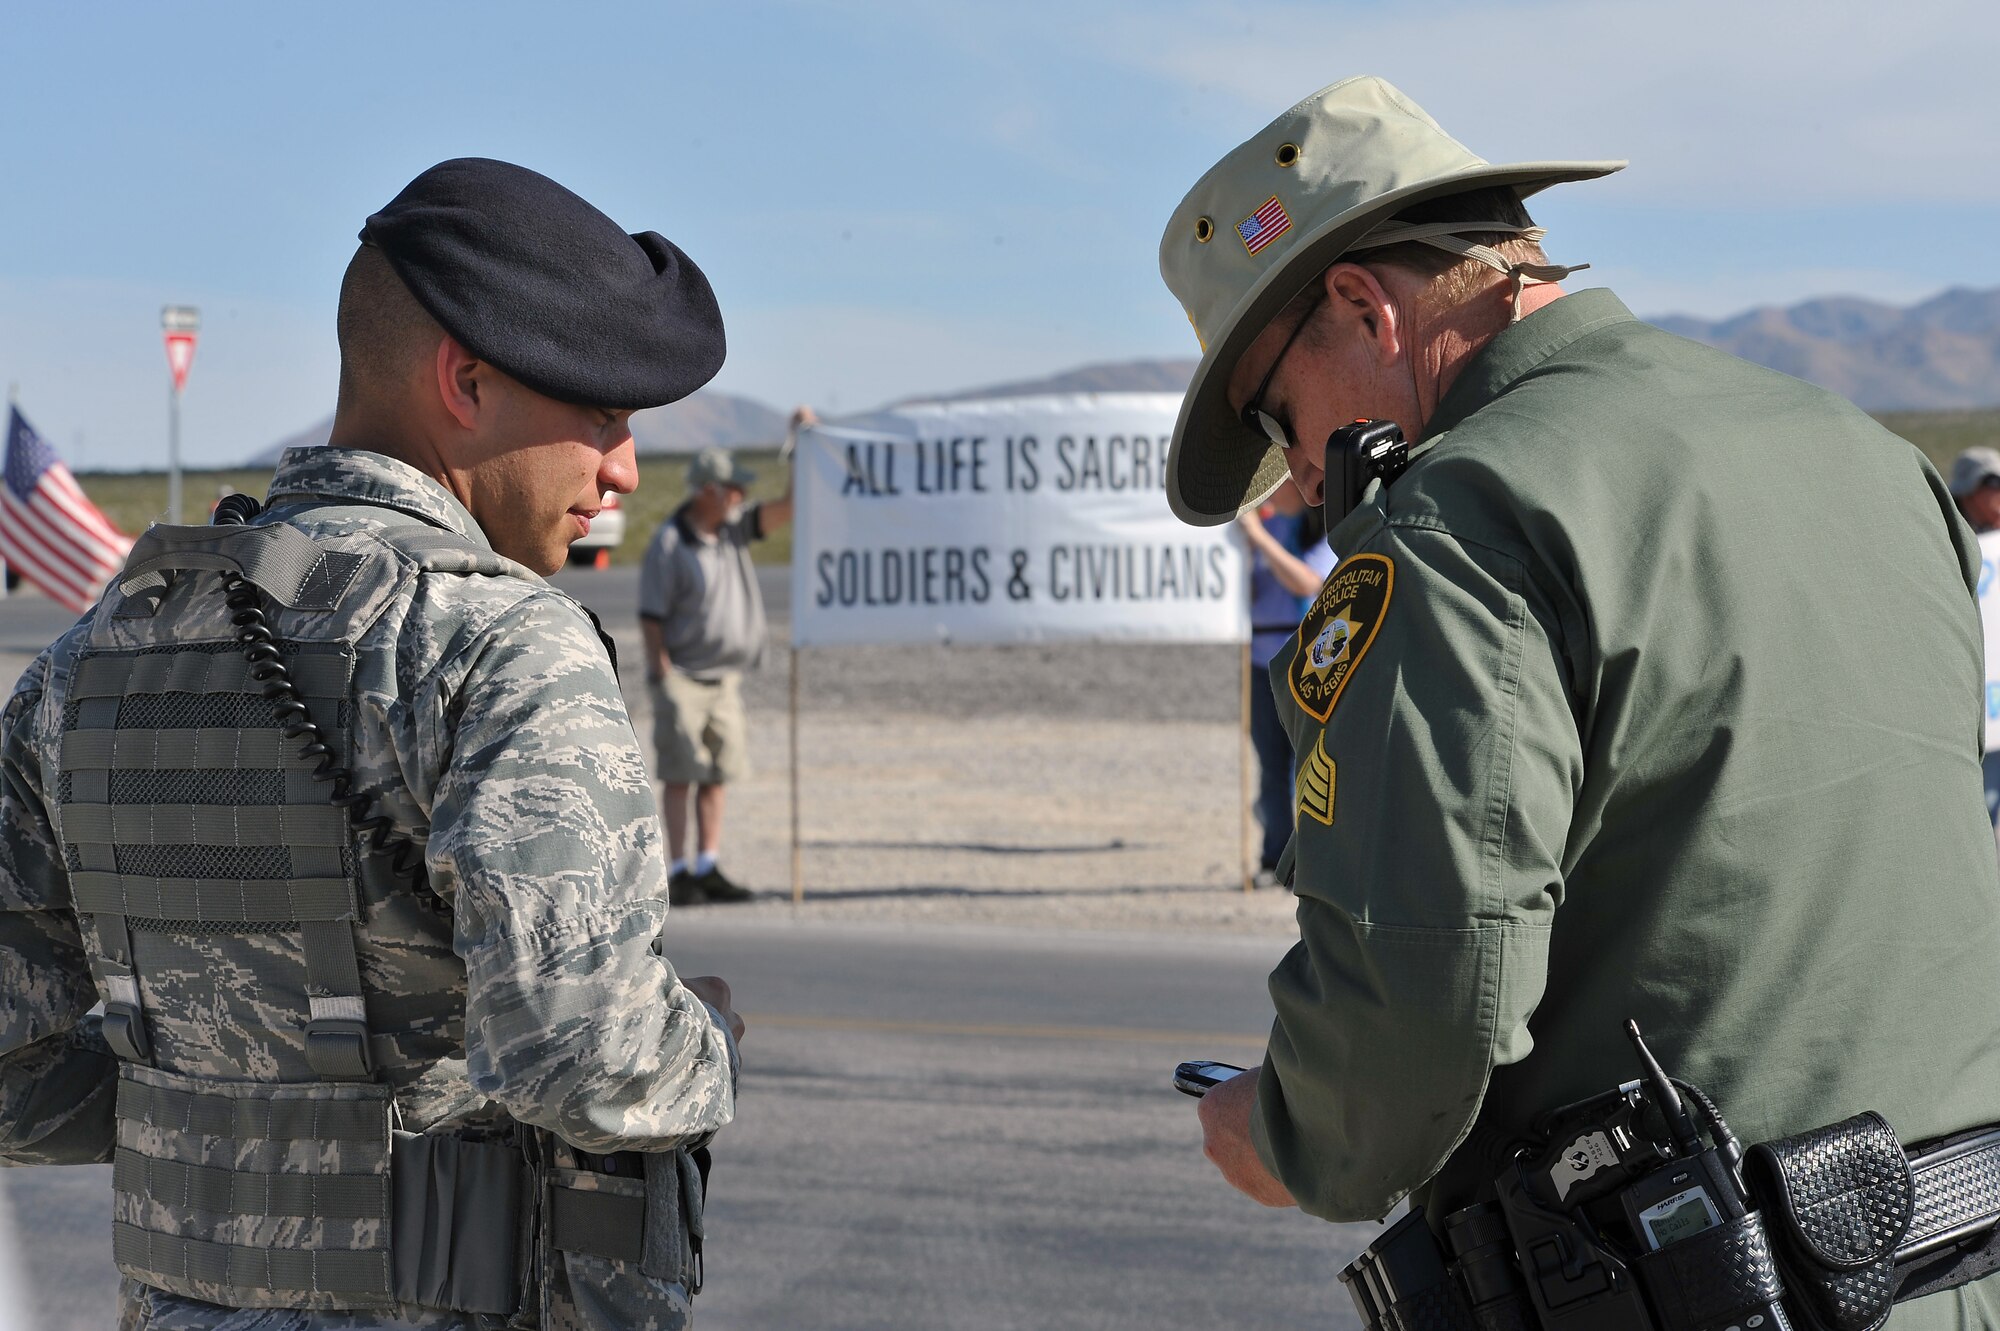 INDIAN SPRINGS, Nev. – 799th Security Forces Squadron and local law enforcement observe demonstrators during a protest, March 29, 2013. Military and civilian law enforcement agencies partner together to help ensure the safety of Airmen while also protecting the First Amendment rights of U.S. citizens. (U.S. Air Force photo by Senior Master Sgt. P.H./Released)